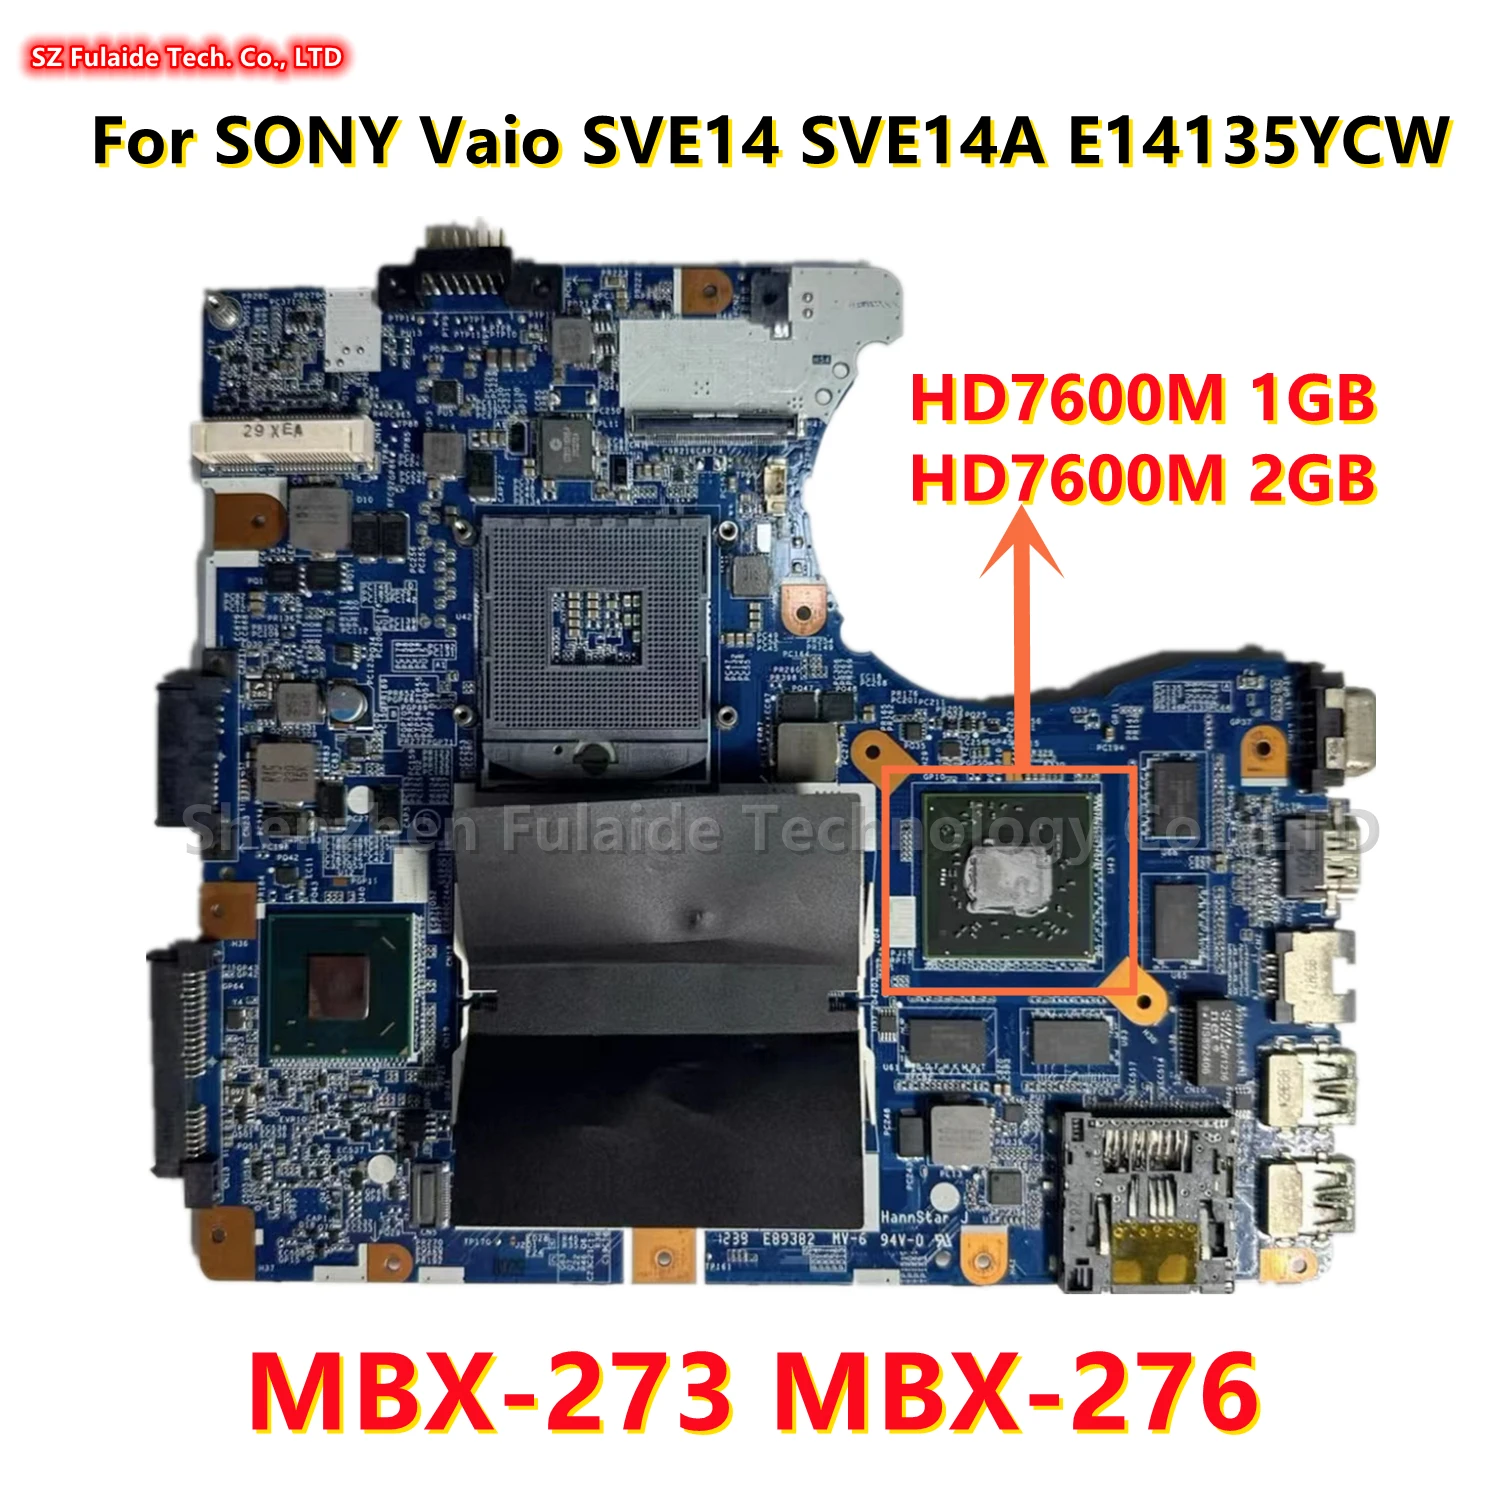 

MBX-273 MBX-276 For SONY Vaio SVE14 SVE14A E14135YCW laptop motherboard With HD7600M 1GB/2GB GPU HM76 1P-0127500-8010 A1898130A